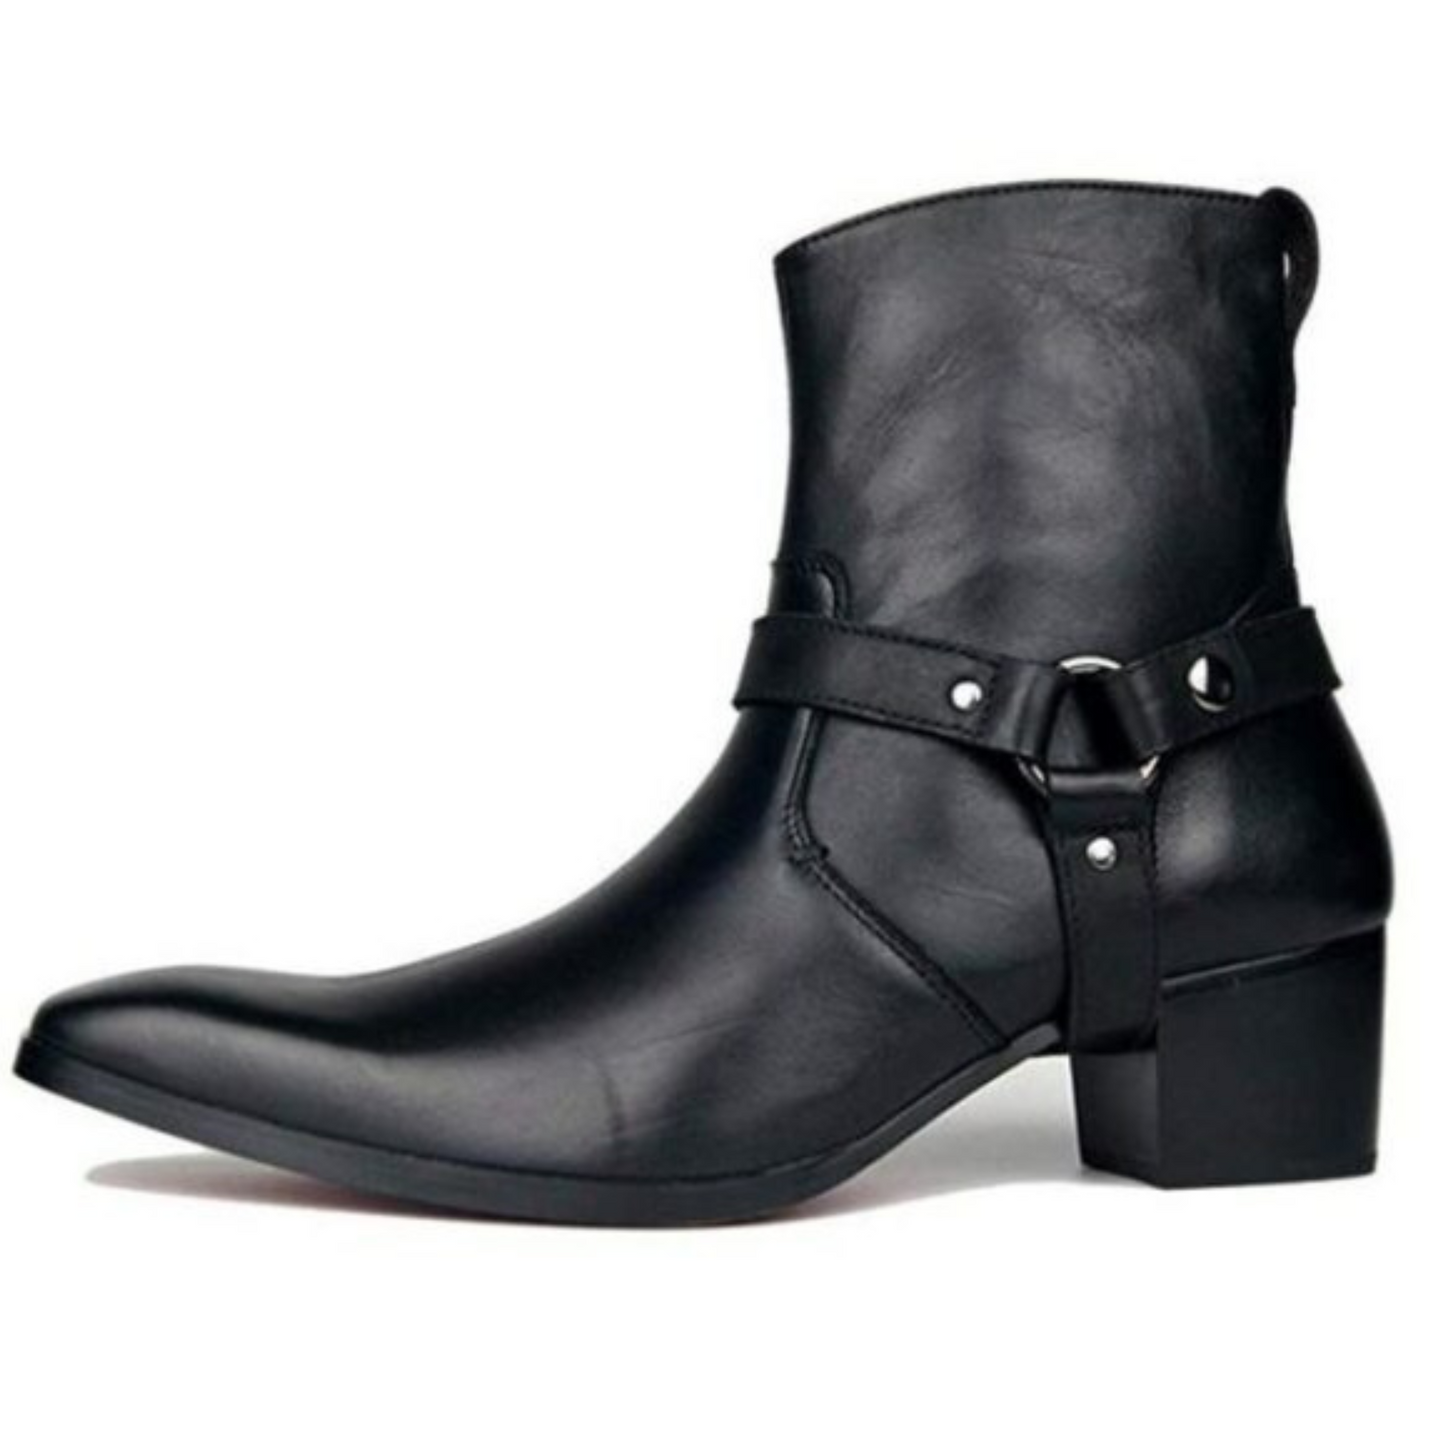 Tailor Made Handmade Black Leather Fashion Designer Ankle Boots